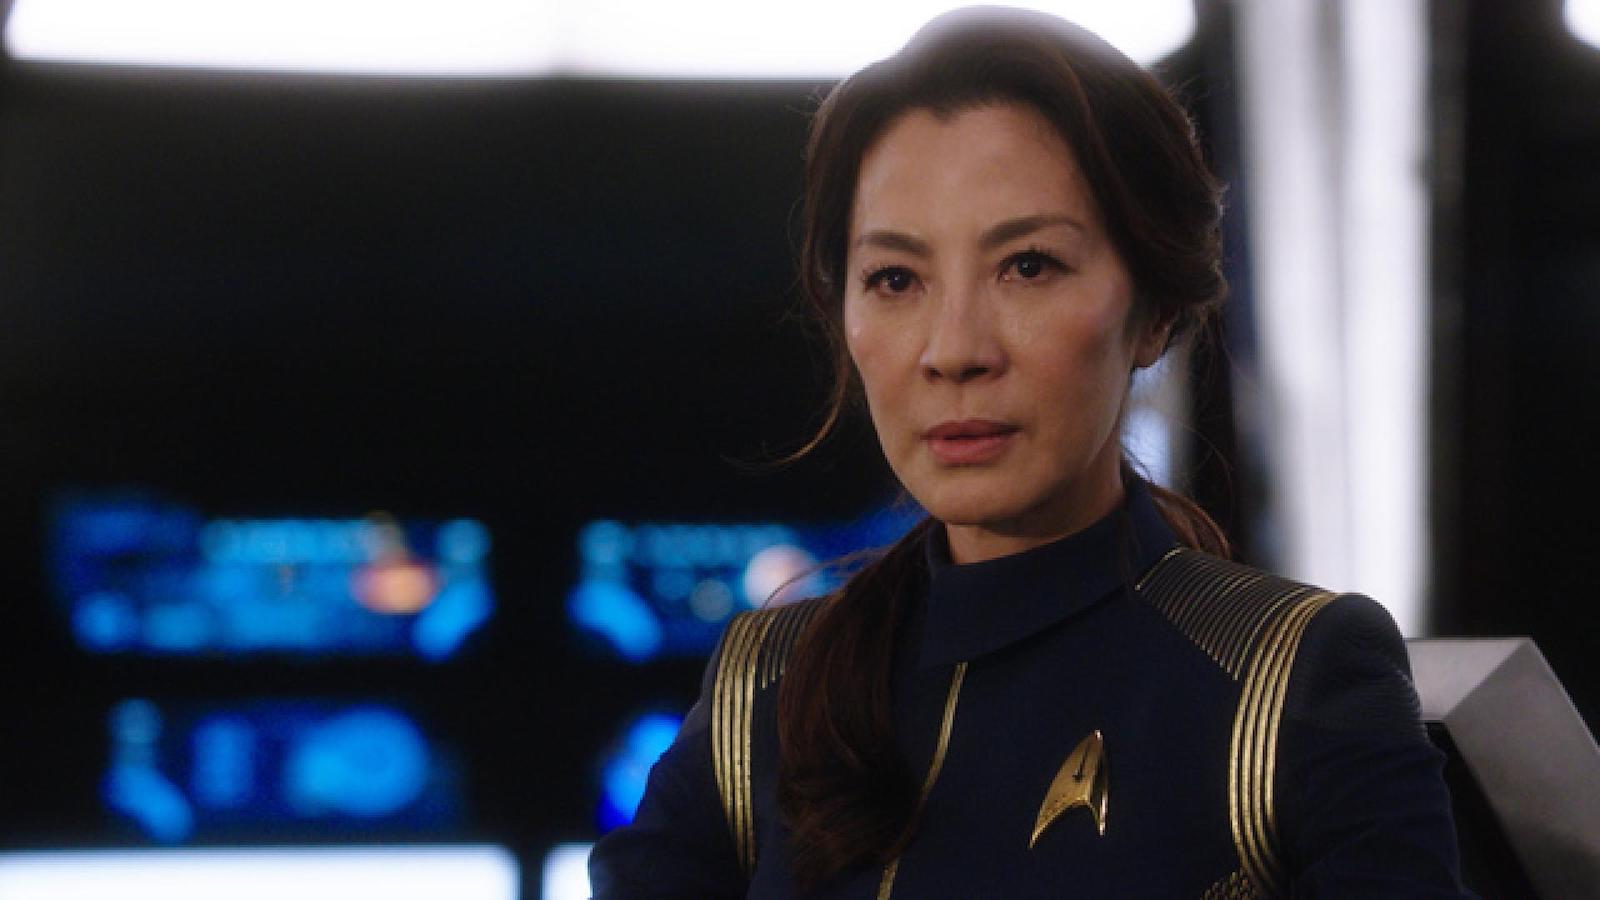 Star Trek: Section 31, Michelle Yeoh stars in the Discovery spin-off film